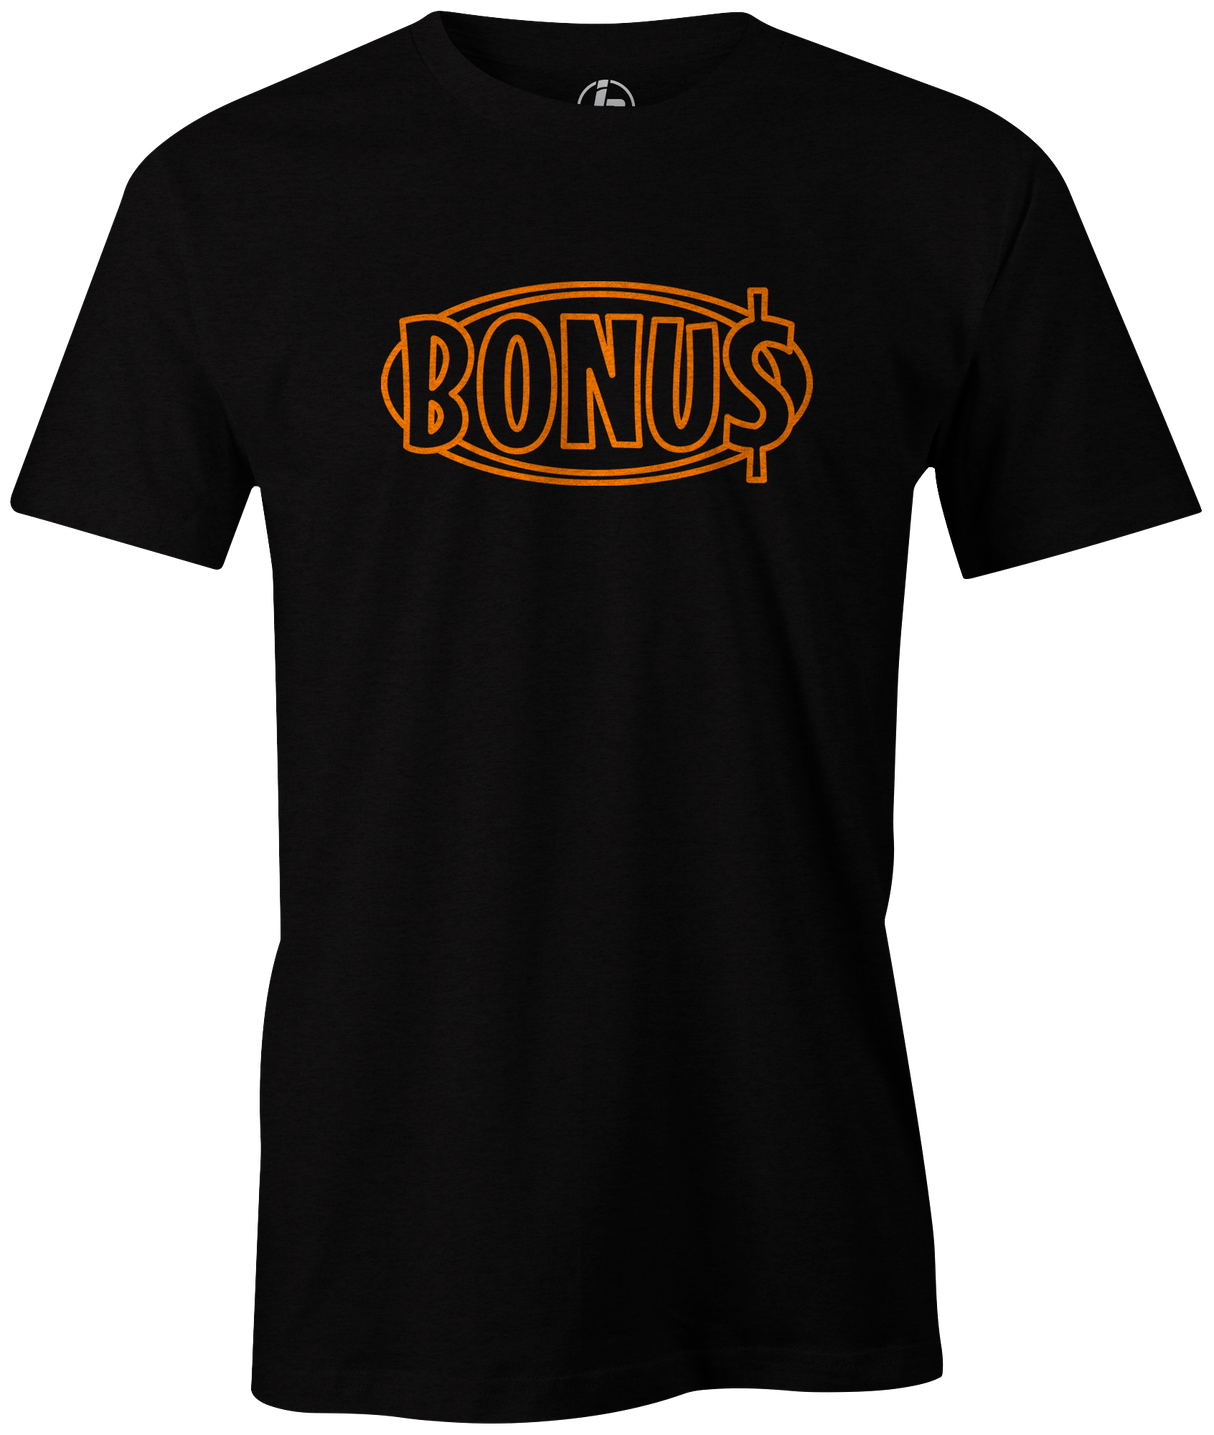 BONU$! Rep this Radical Bowling Bonus Tshirt while advancing to Bonus Bowling in your next tournament. available at Inside Bowling. Comfortable cheap discounted special bowling shirts for bowlers online. Get what you can't get on Amazon, Walmart, Target, or E-Bay here. Men's T-Shirt, Purple, bowling, bowling ball, tee, tee shirt, tee-shirt, t shirt, t-shirt, tees, league bowling team shirt, tournament shirt, funny, cool, awesome, brunswick, brand